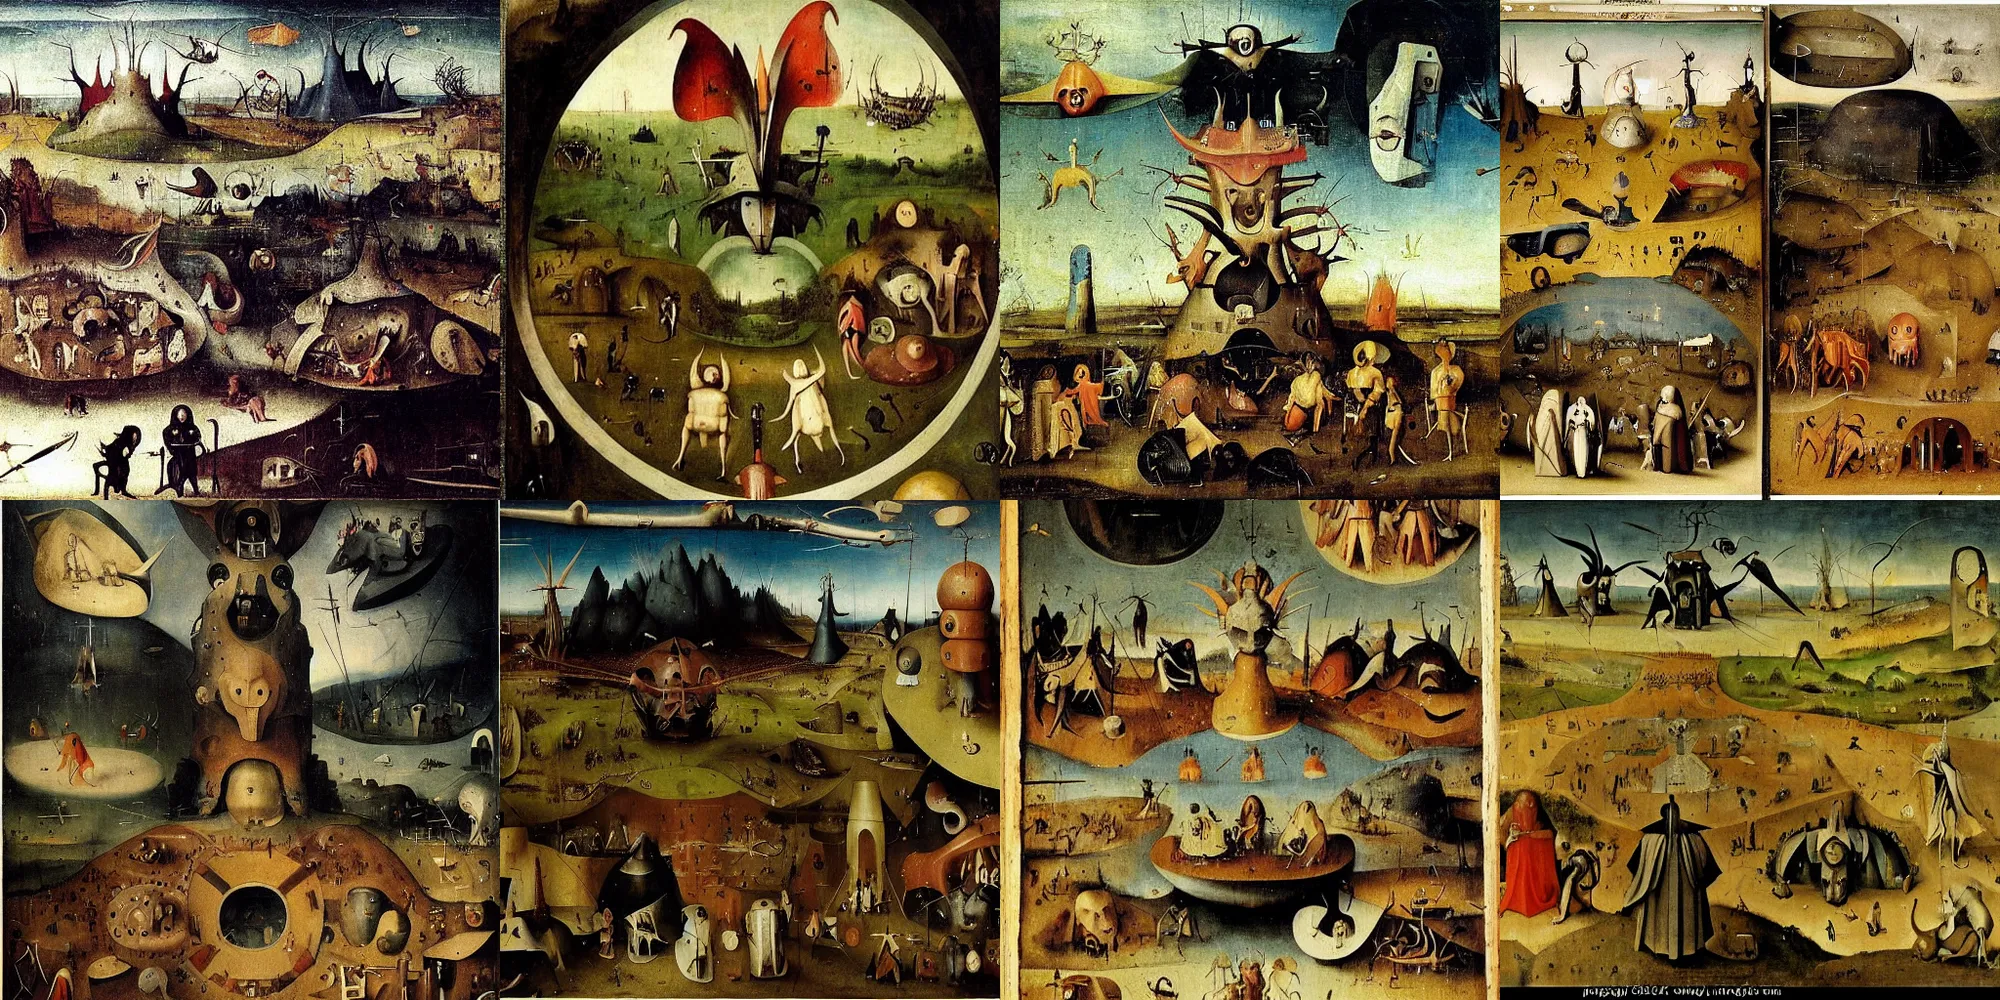 Prompt: epic cinematic saga about life and death. men and women, nature and machines, gods and animals - all meet here for love, war and oblivion., painted by Hieronymus Bosch